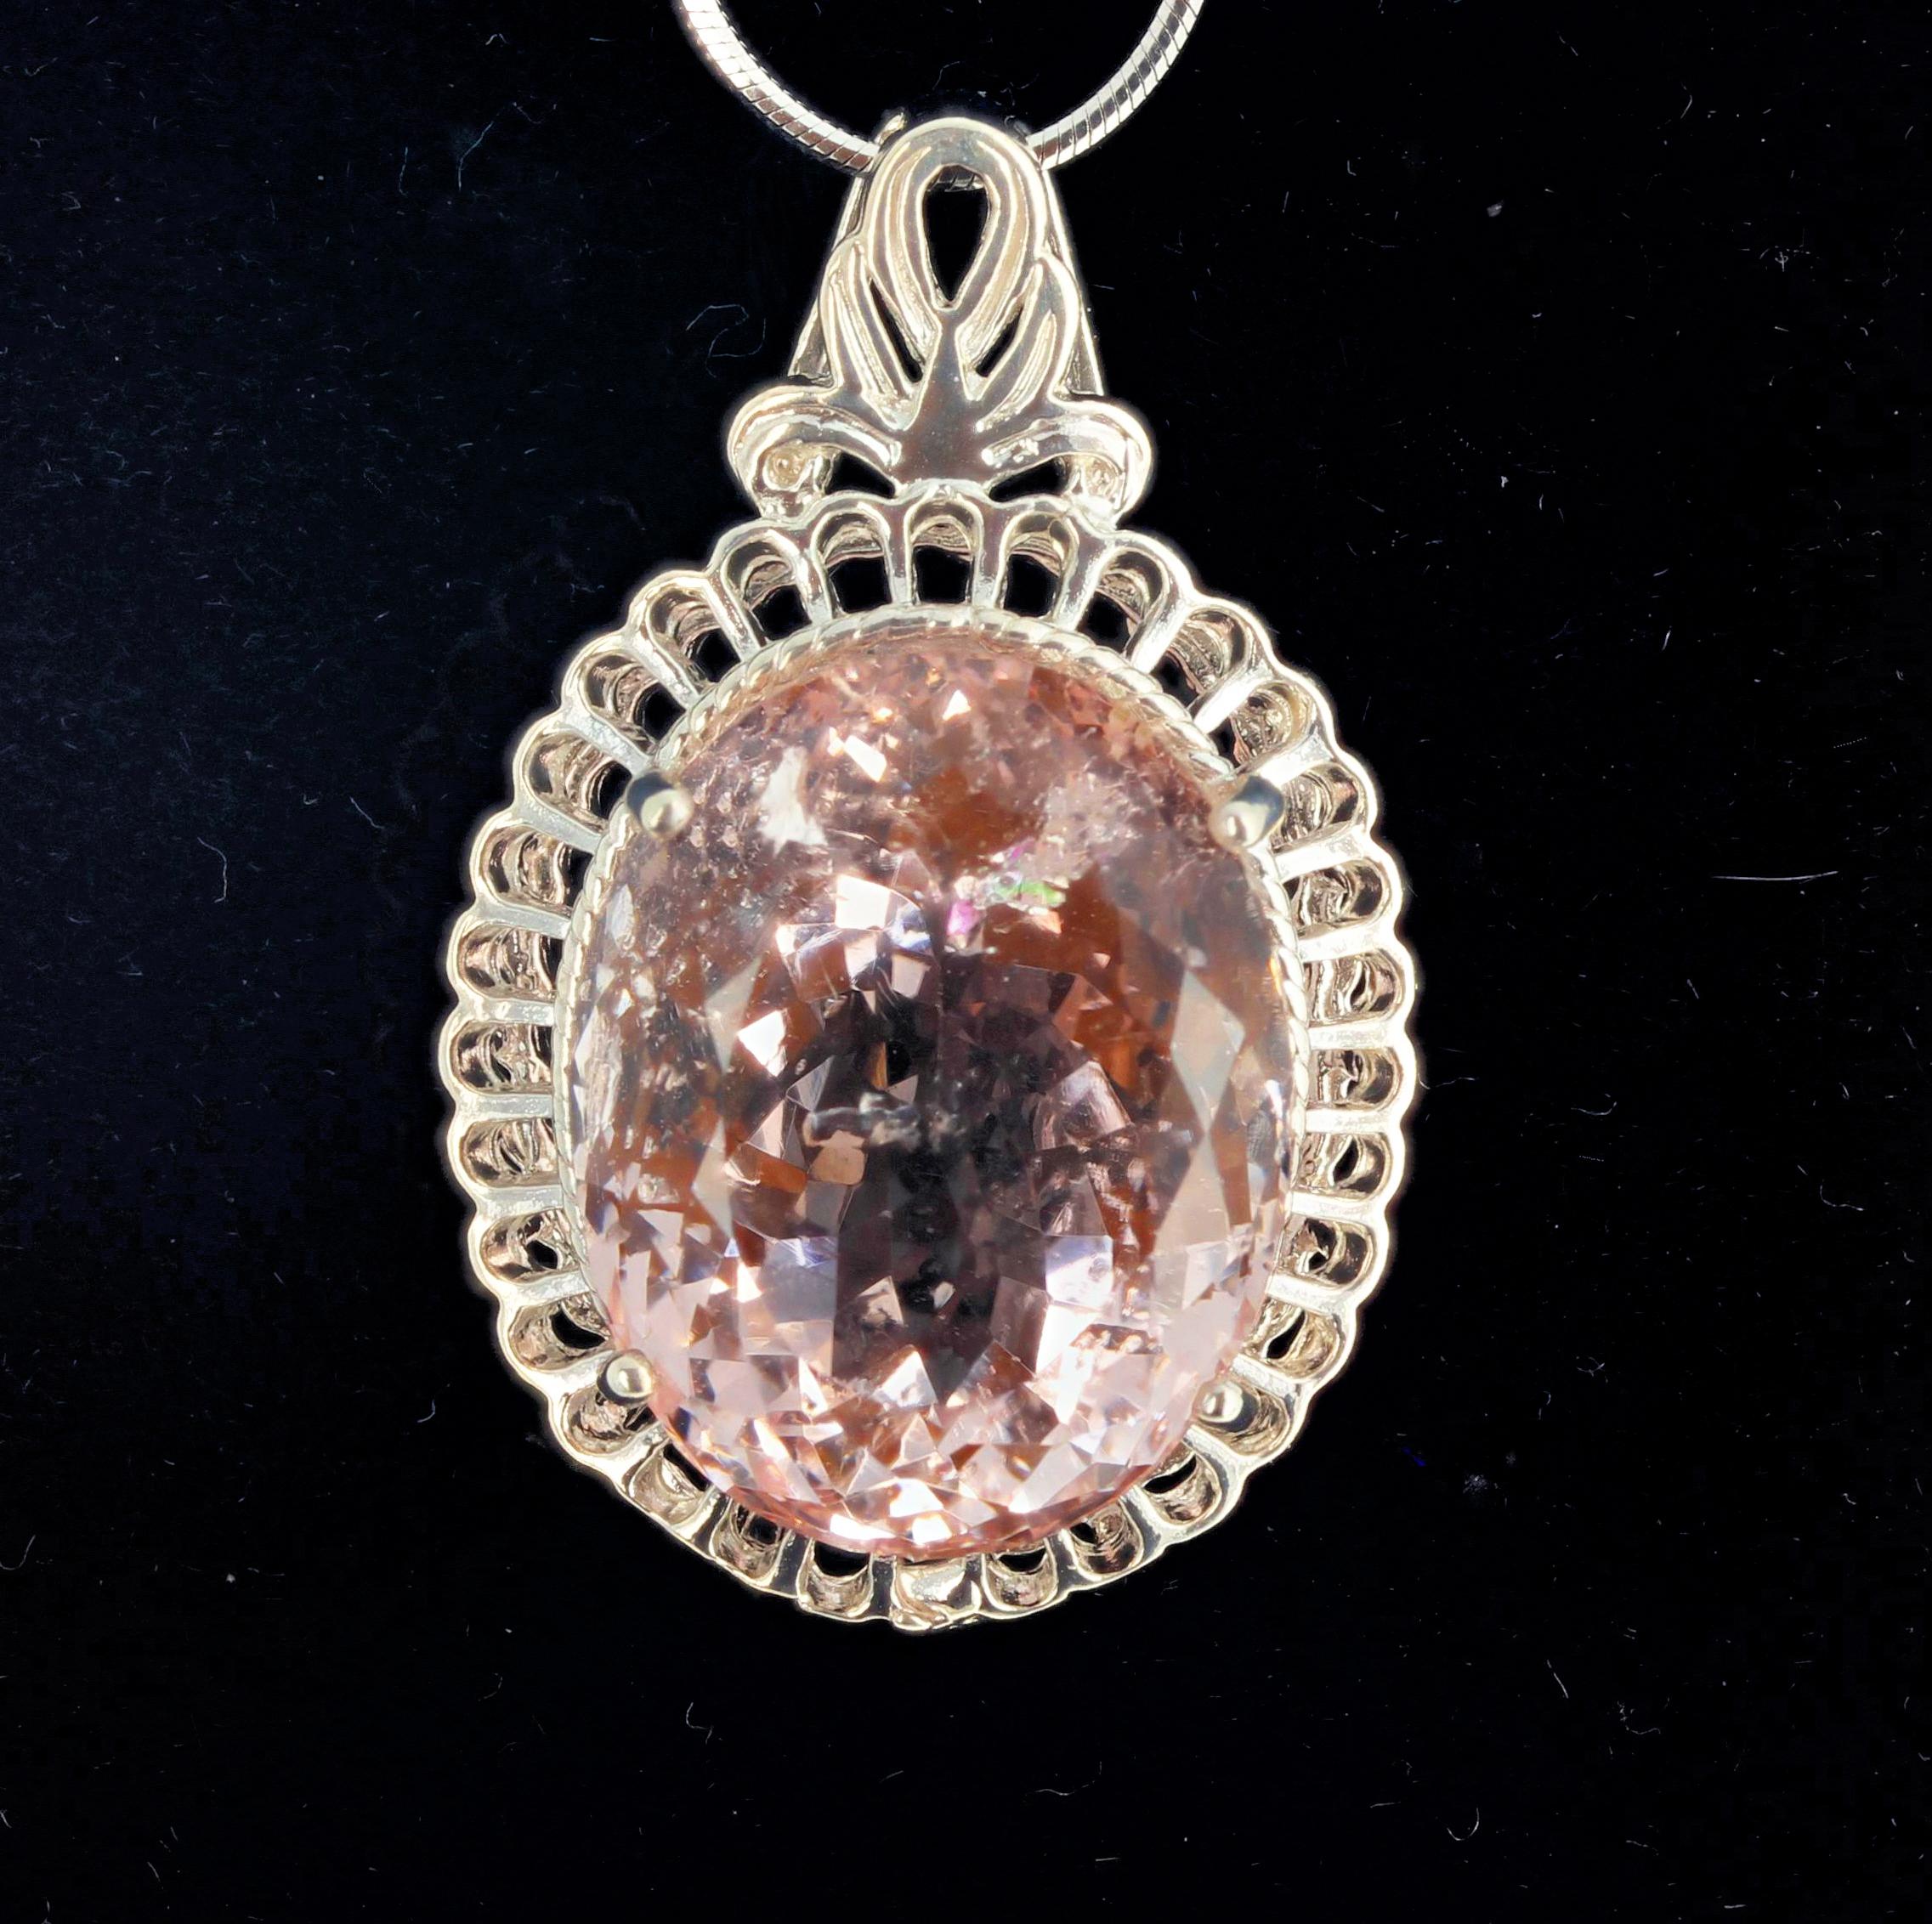 Unique handmade Brilliant rare huge 29 carat natural Morganite (20 mm x 16 mm) set in a sterling silver pendant.  This hangs approximately 1.7 inches long. Spectacular optical effect in the imperial topaz exhibits gold reflections and fire